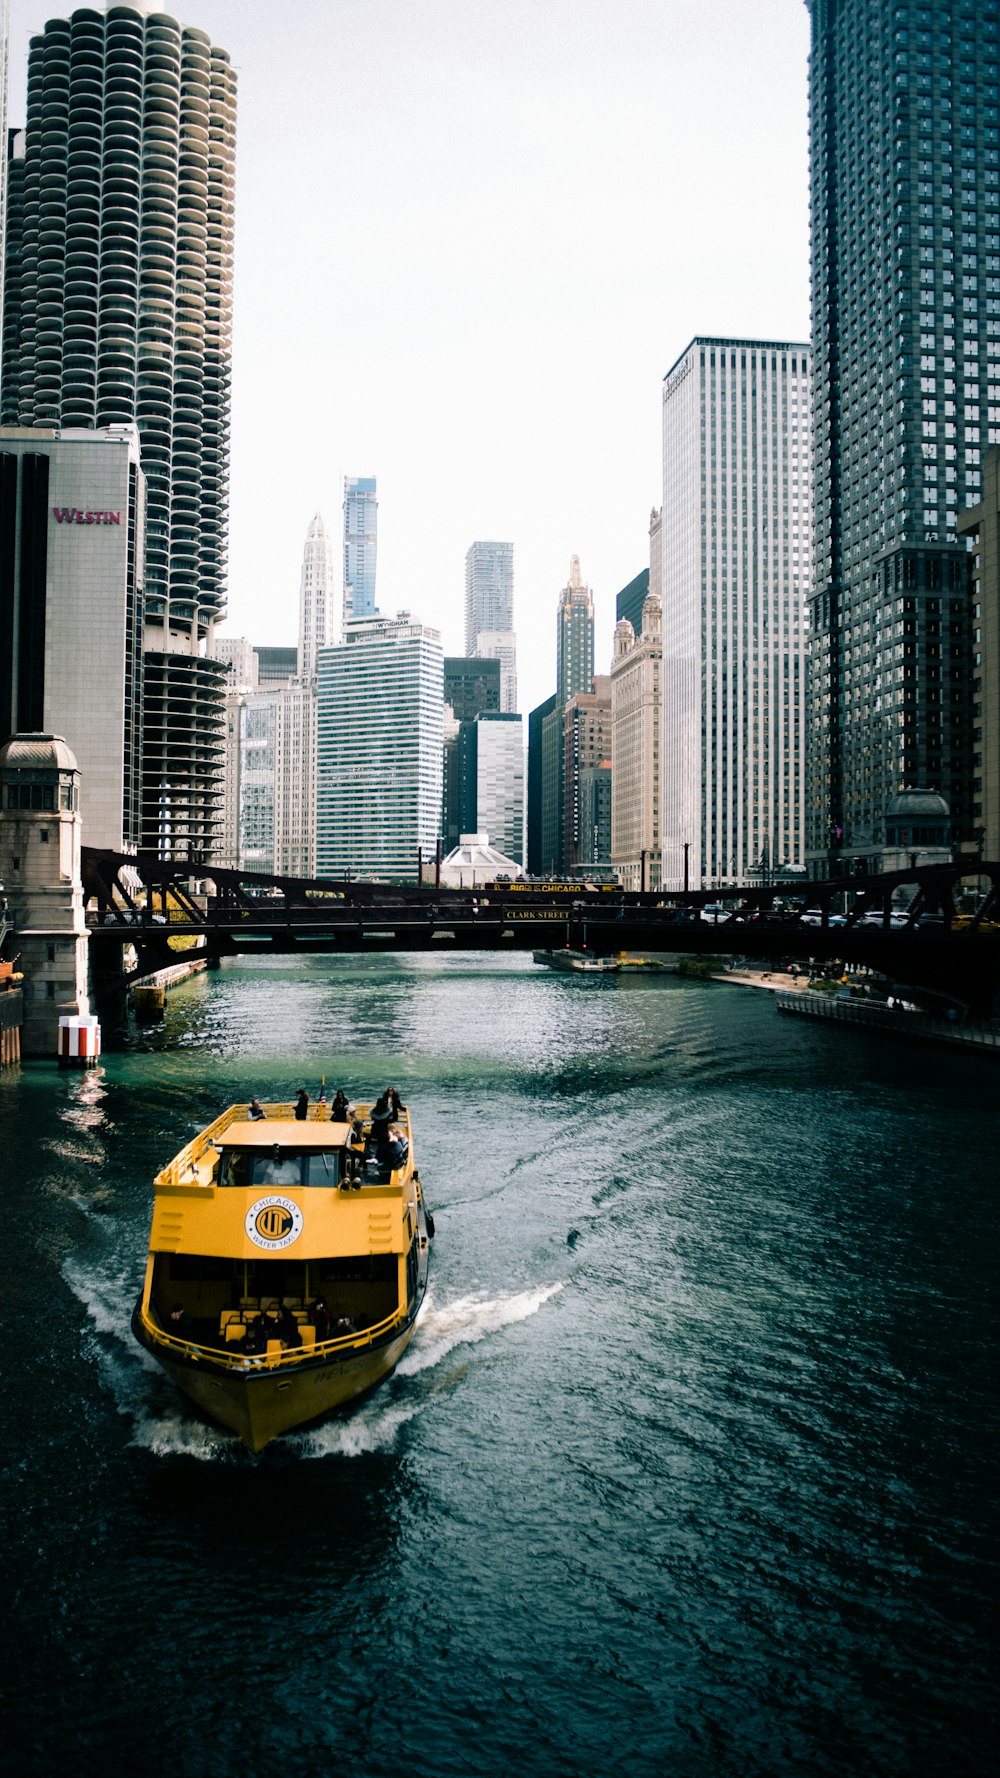 yellow and black boat on water near high rise buildings during daytime